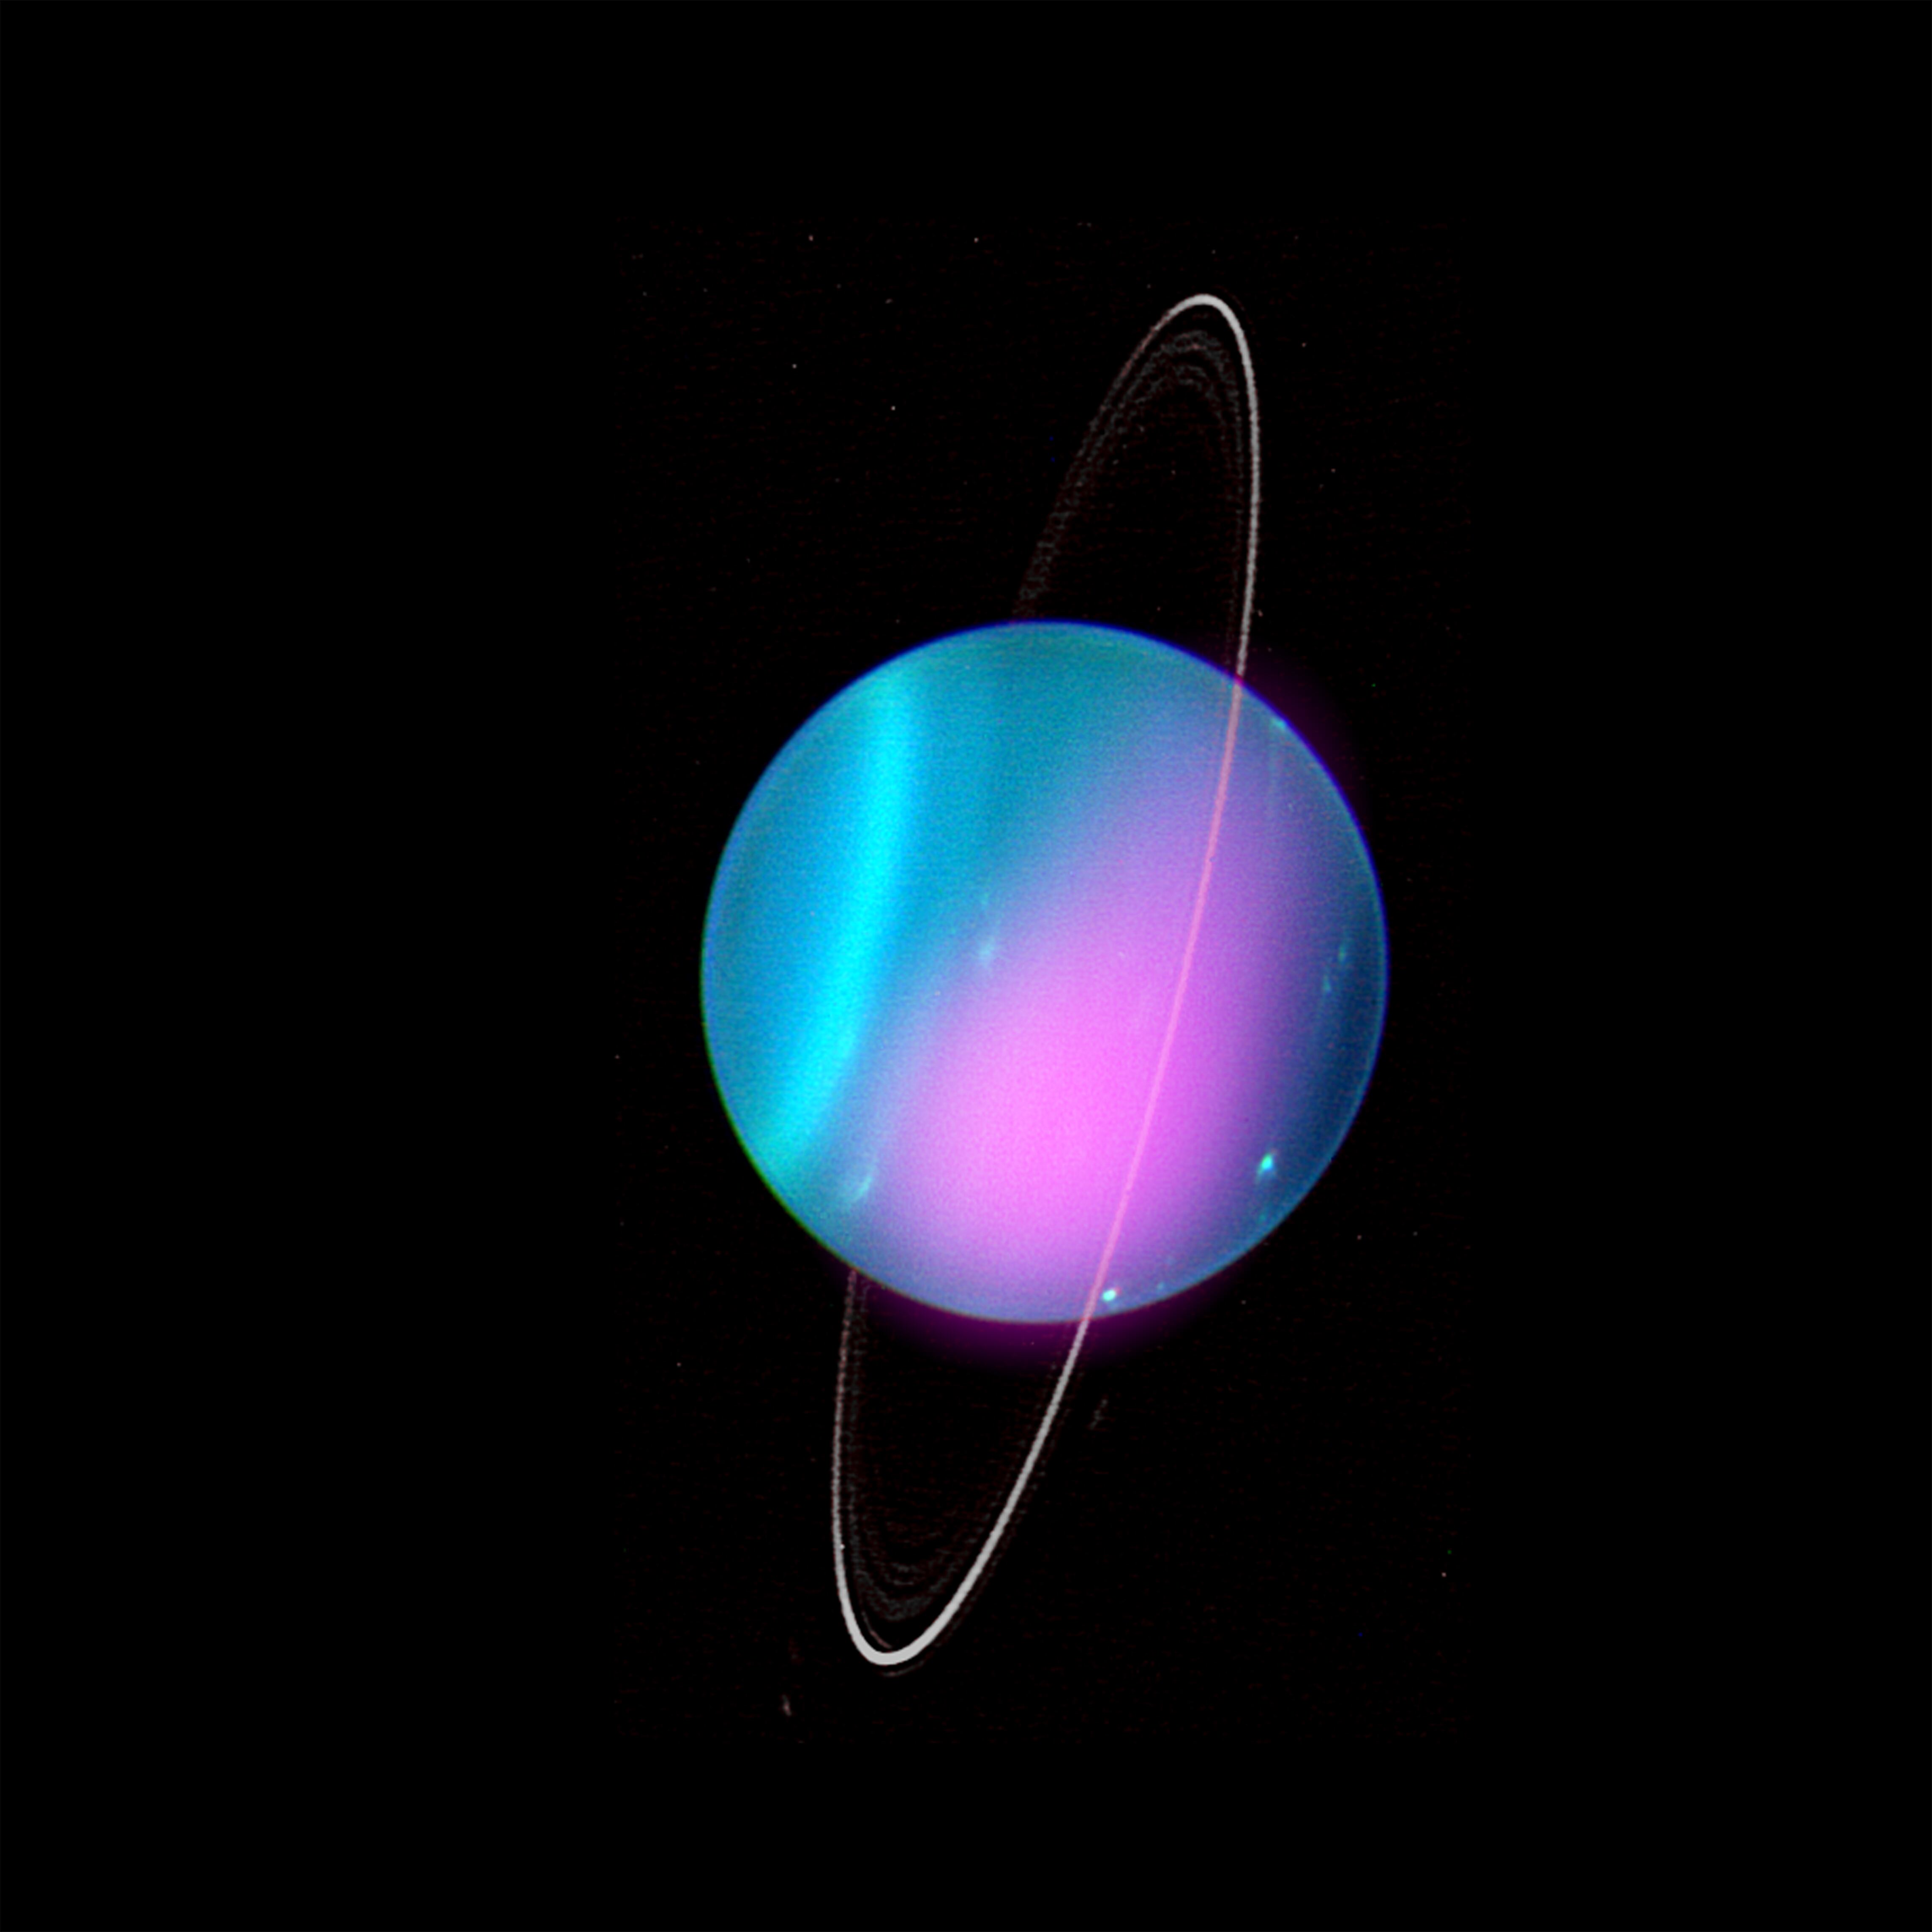 The inclination of Uranus's axis of rotation reaches almost 90 degrees, and that is why there are areas where winters last dozens of years.